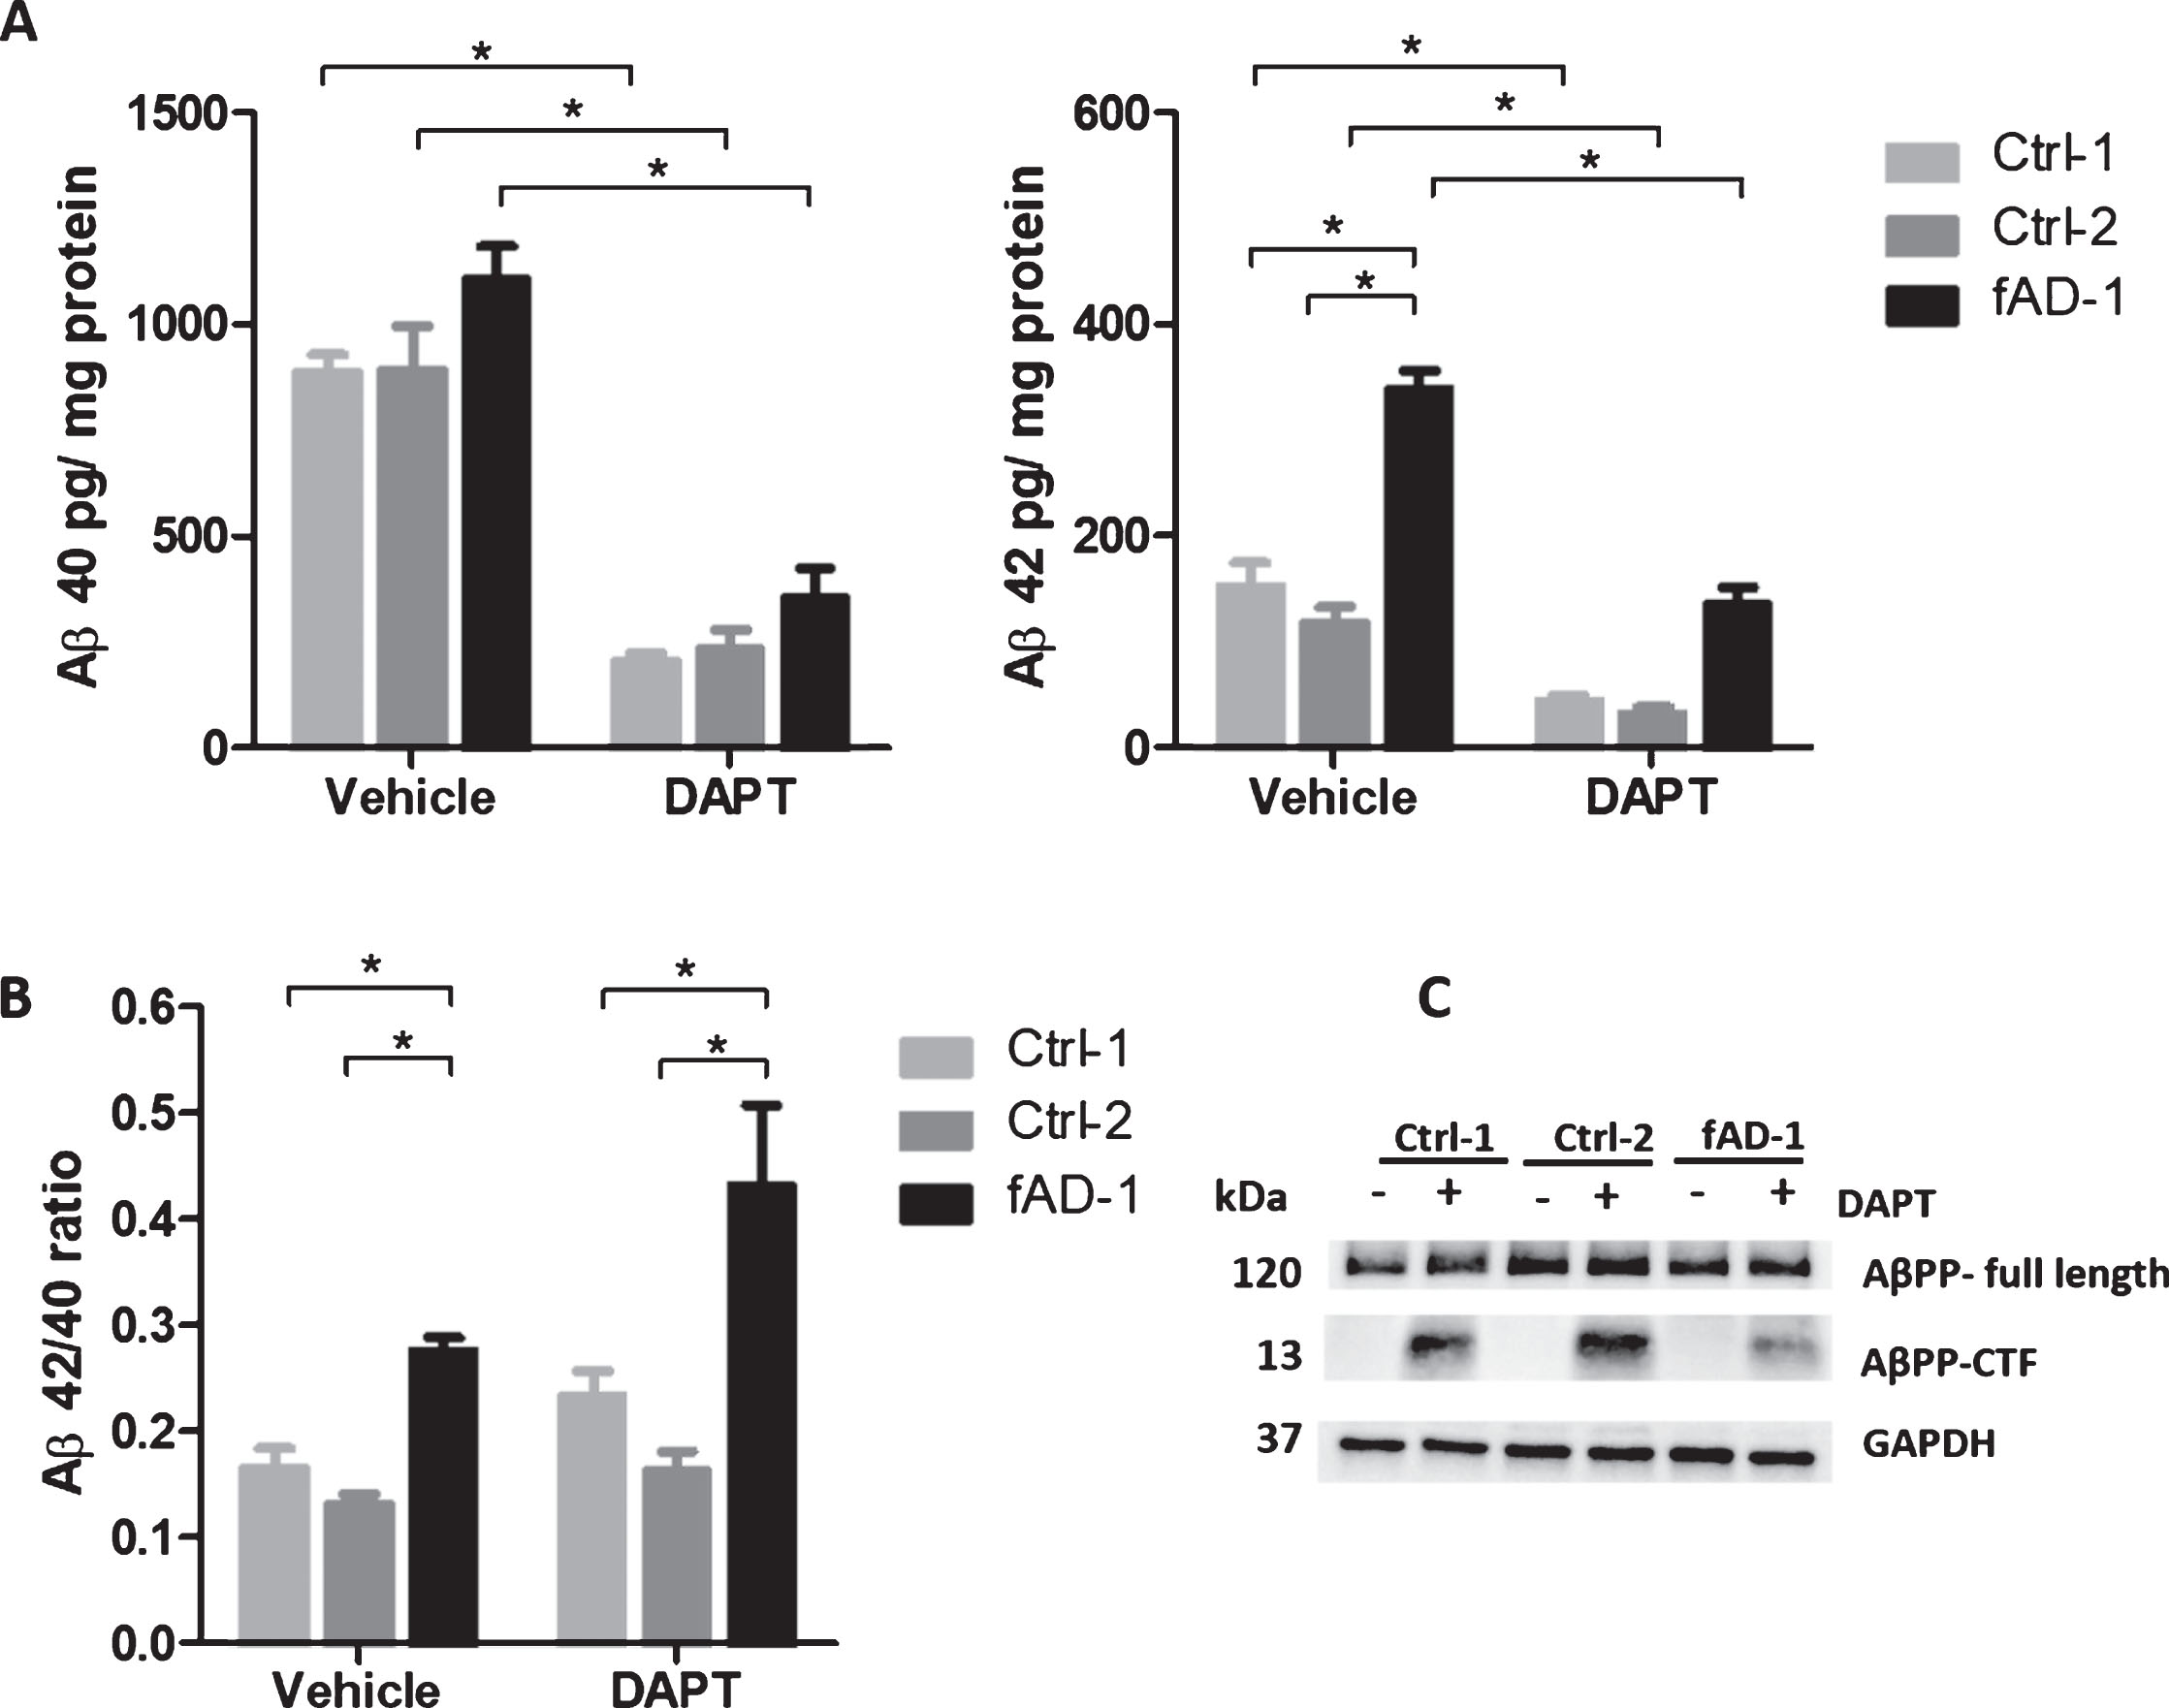 Pharmacological modulation of amyloid secretion and AβPP processing by DAPT treatment. A) ELISA analyses of Aβ40 and Aβ42 endogenously secreted into conditioned media from controls (Ctrl-1 and Ctrl-2) and fAD cell lines treated with vehicle (0.1% DMSO) or with 1 μM DAPT for 48 h. Data normalized to total mg of protein. B) Ratio between Aβ42 and Aβ40 secreted from controls (Ctrl-1 and Ctrl-2) and fAD cell lines±treatment with 1 μM DAPT for 48 h. C) Representative western blot analysis of total lysates showing the accumulation of AβPP-CTF upon treatment with 1 μM DAPT for 48 h; In A and B, two-tailed t-tests were performed when comparing different conditions (vehicle and DAPT) within the same cell line, while one-way ANOVA performed with Tukey’s multiple comparisons test was applied to find differences between the cell lines. *p < 0.05; Error bars = SEM; ELISA and WB measurements were performed at least as biological triplicates.